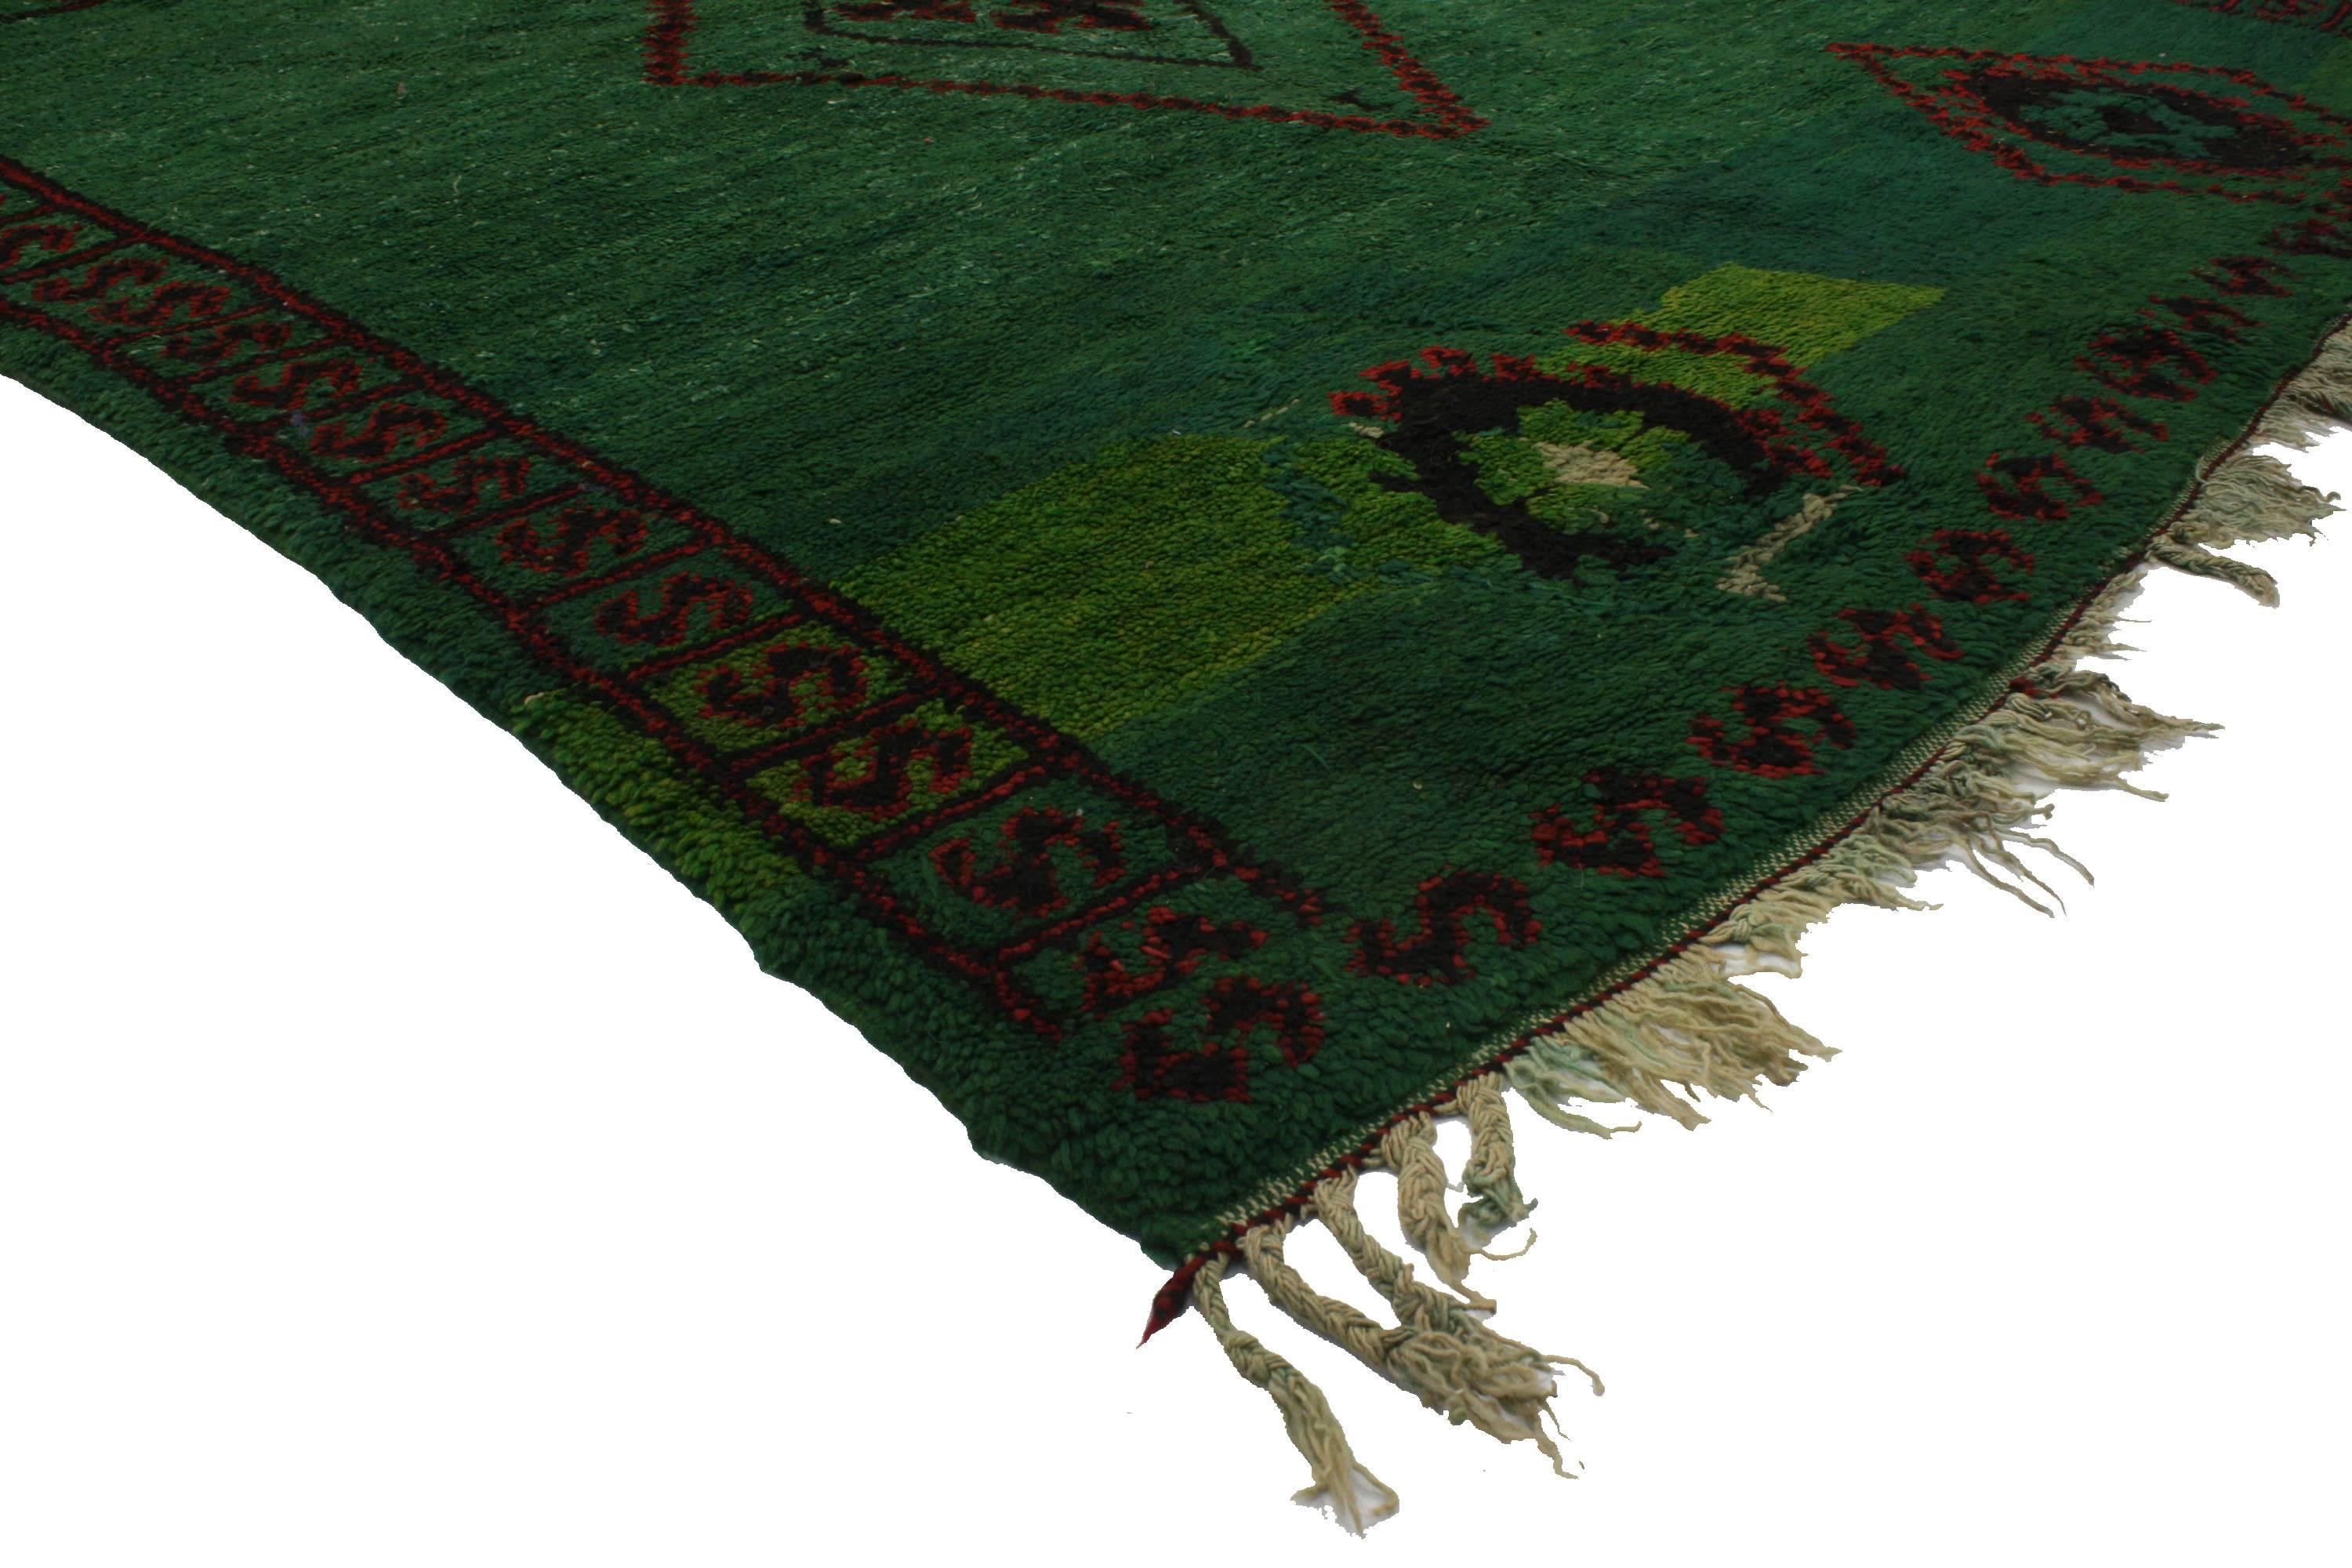 Mid-Century Modern Green Beni M'guild Moroccan Rug in Malachite Color with Tribal Style